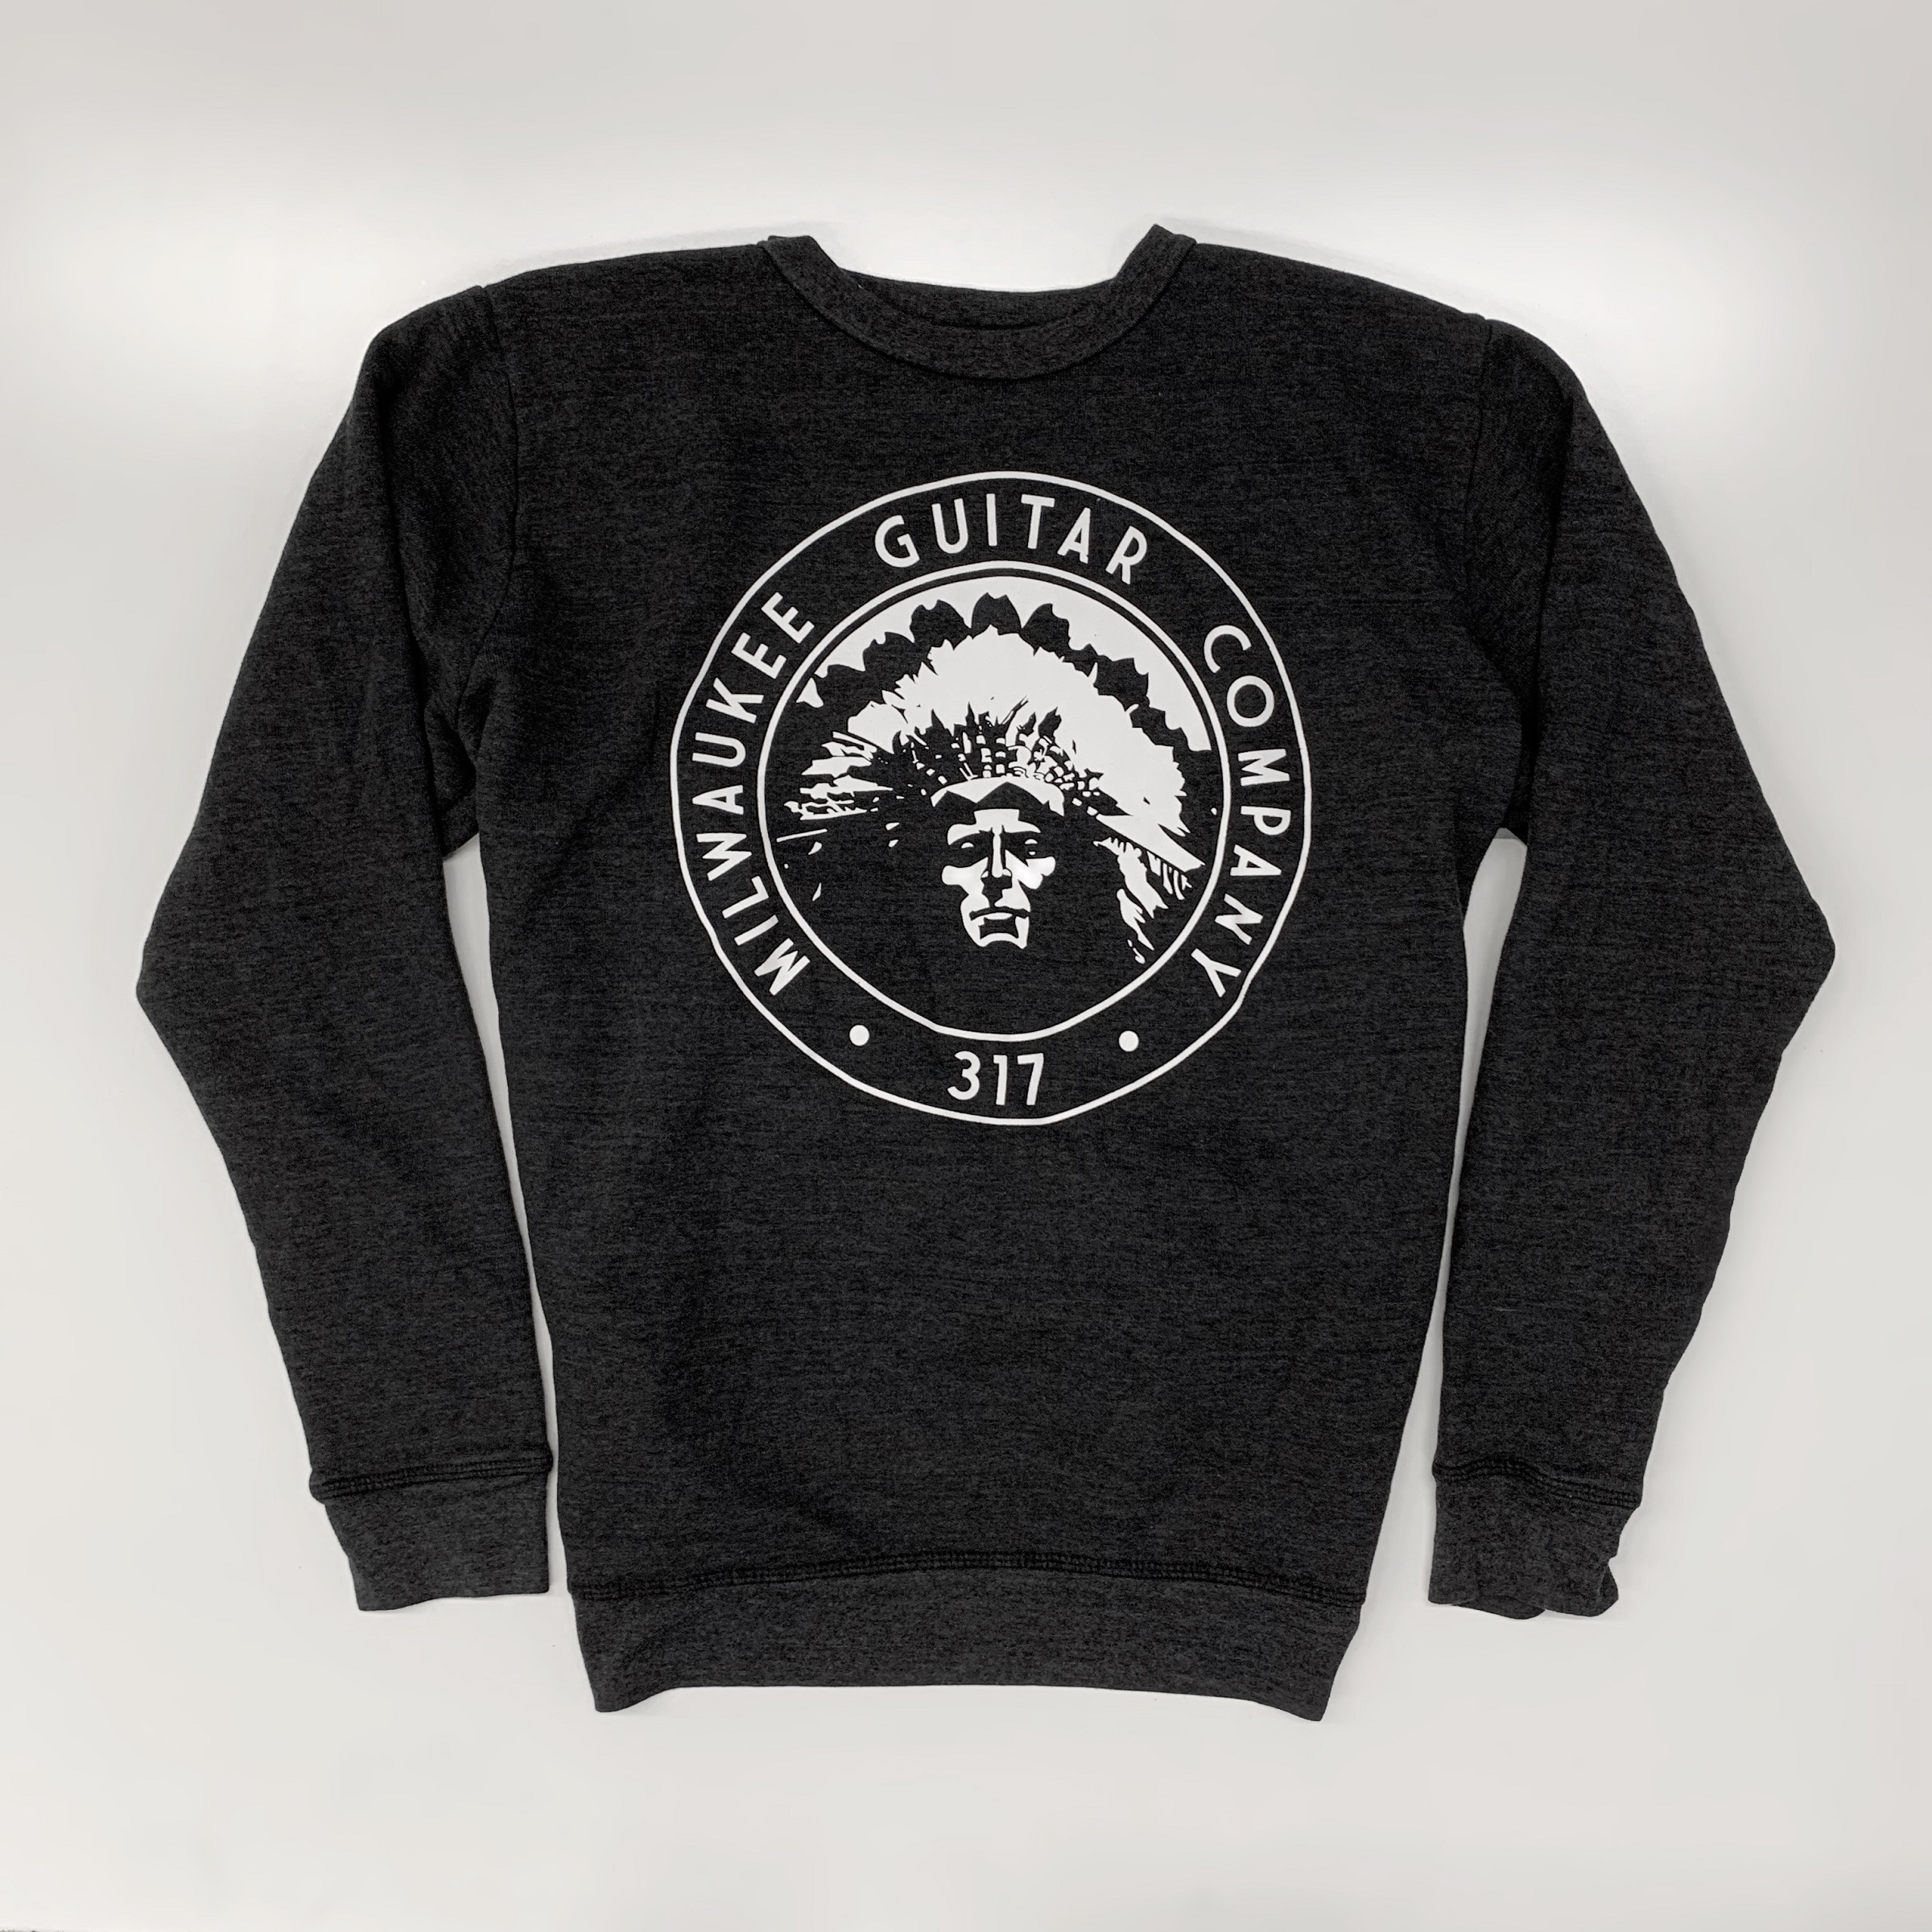 milwaukee, mke, home, mkehome, milw, milw., brew, city, cream, brewcity, creamcity, miltown, native, american, chief, indian, logo, guitars, guitar, company, co. , co, sweat, shirt, sweatshirt, heavy, weight, cotton, blend, tri, heather, charcoal, black, classic, crew, neck, crewneck, soft, comfortable, graphic, logo, art, design, artistic, print, printed, merchandise, gear, apparel, black, grey, white, charcoal, cotton, blend, made, in, usa, u.s.a., united, states, of america, american